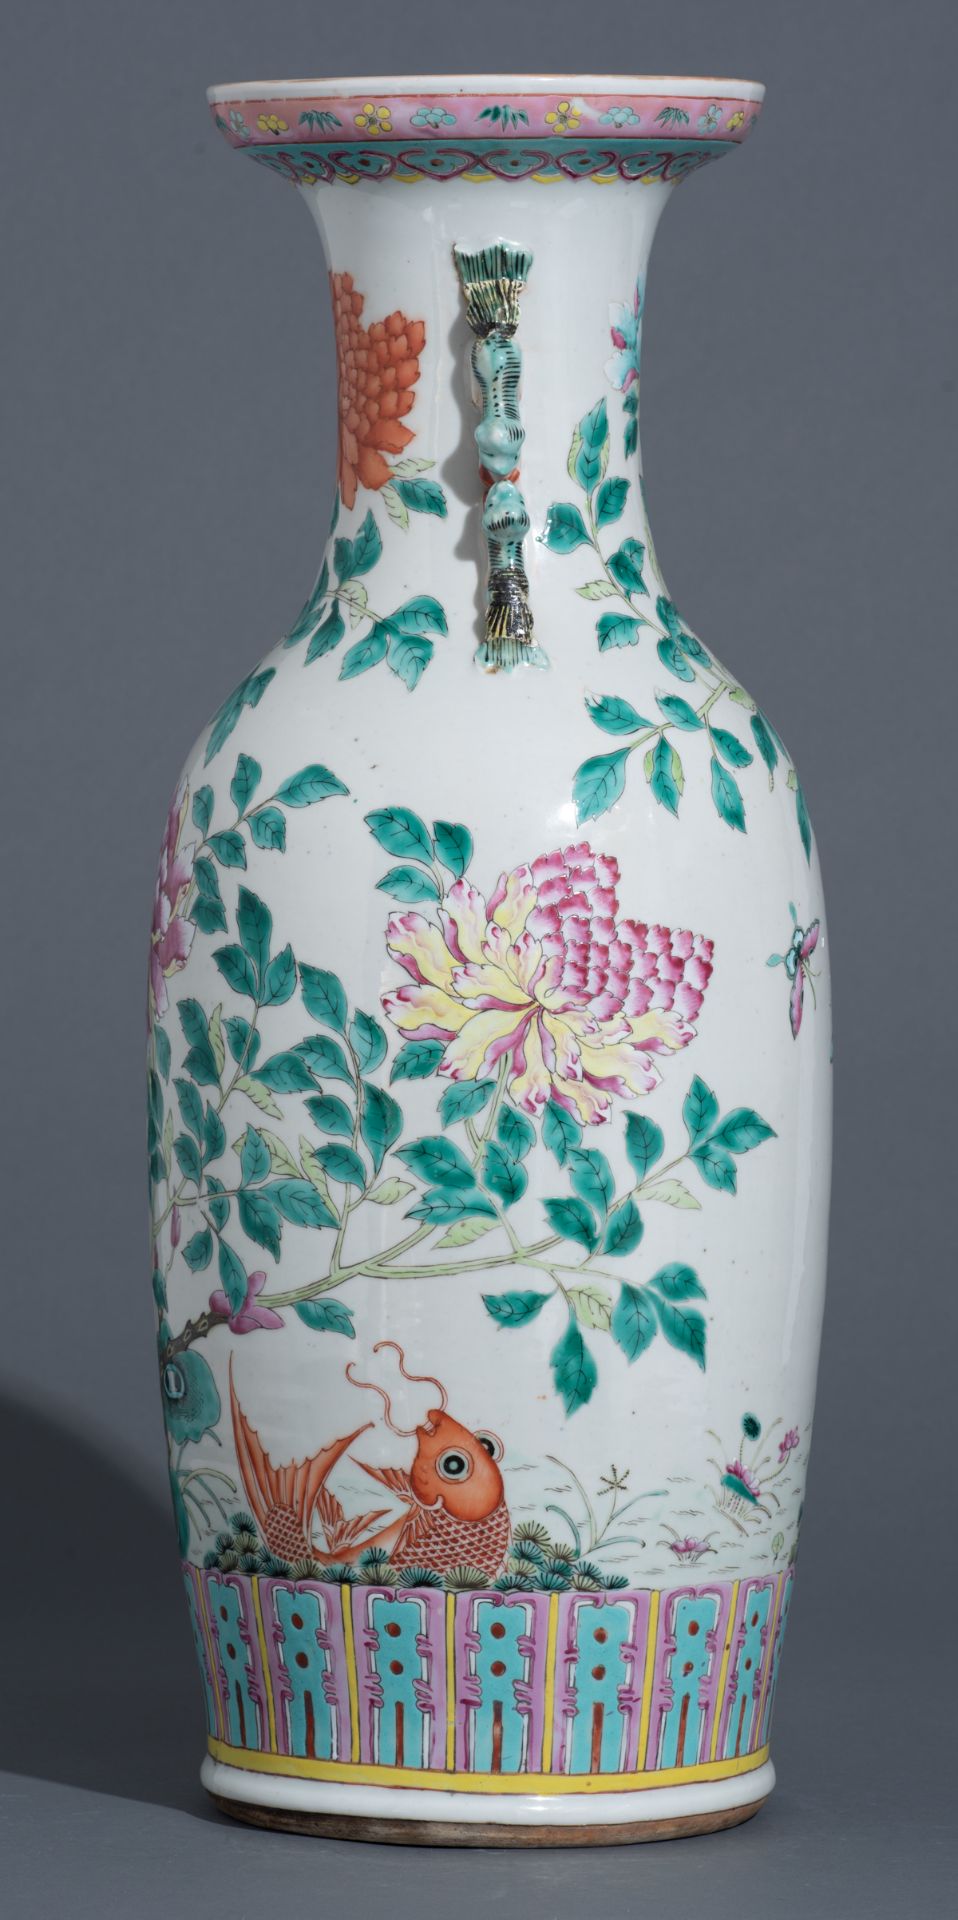 A Chinese famille rose vase, overall decorated with flowers, butterflies and carps, 19thC, H 61 cm - Bild 3 aus 7